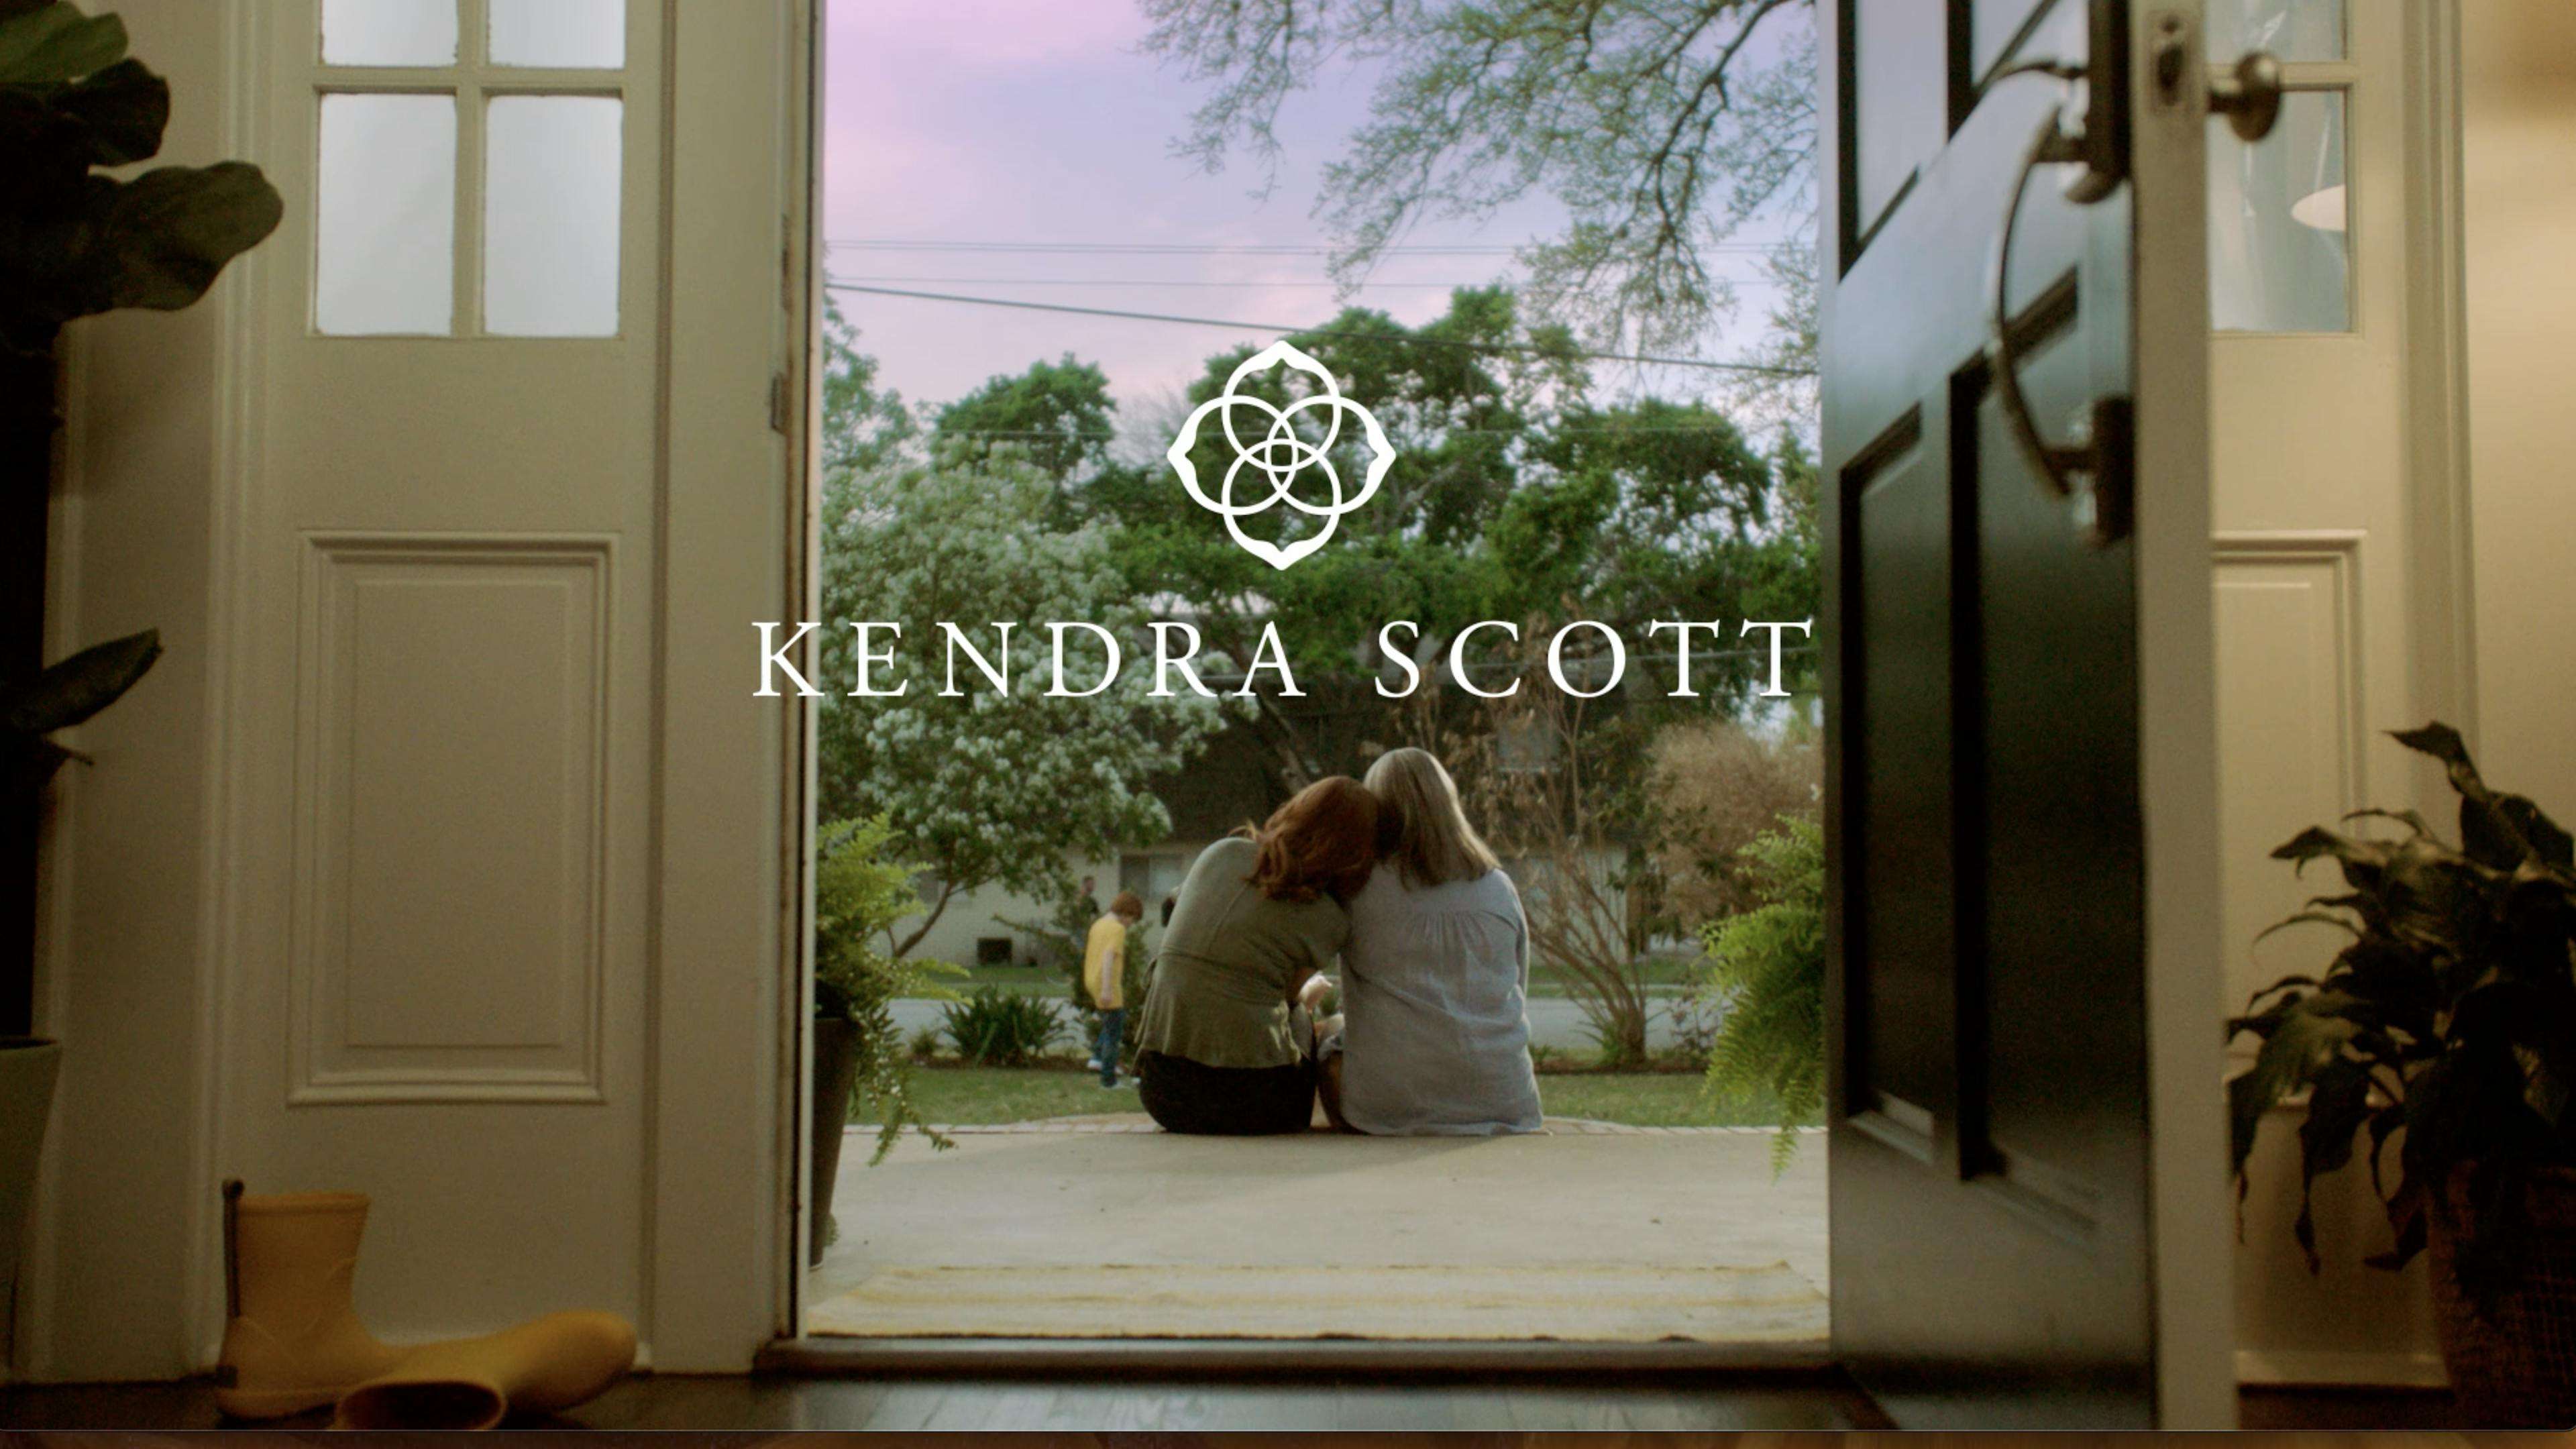 Viewed from the back, two women sit side by side on their front porch with the Kendra Scott logo overlaying the image